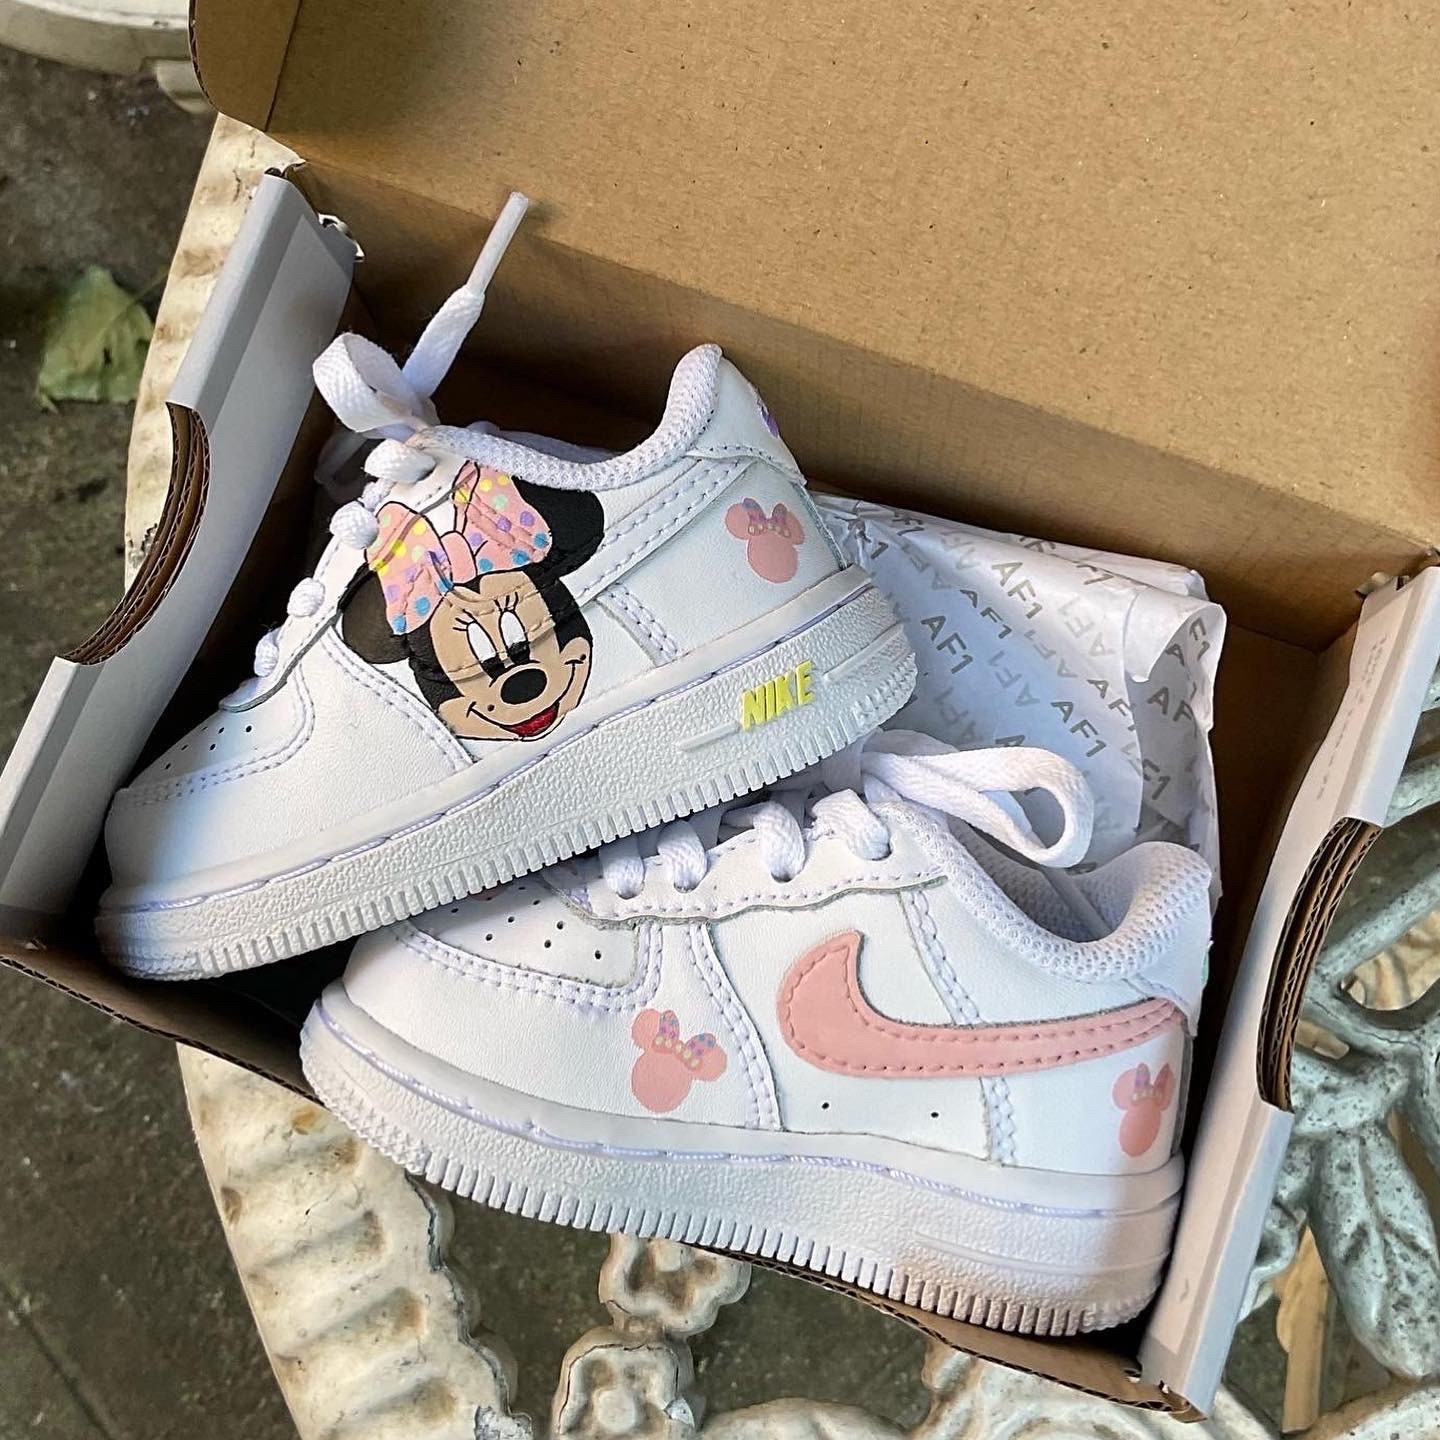 Air Force 1 Custom Low Cartoon Chicago Red Shoes White Black Outline M –  Rose Customs, Air Force 1 Custom Shoes Sneakers Design Your Own AF1